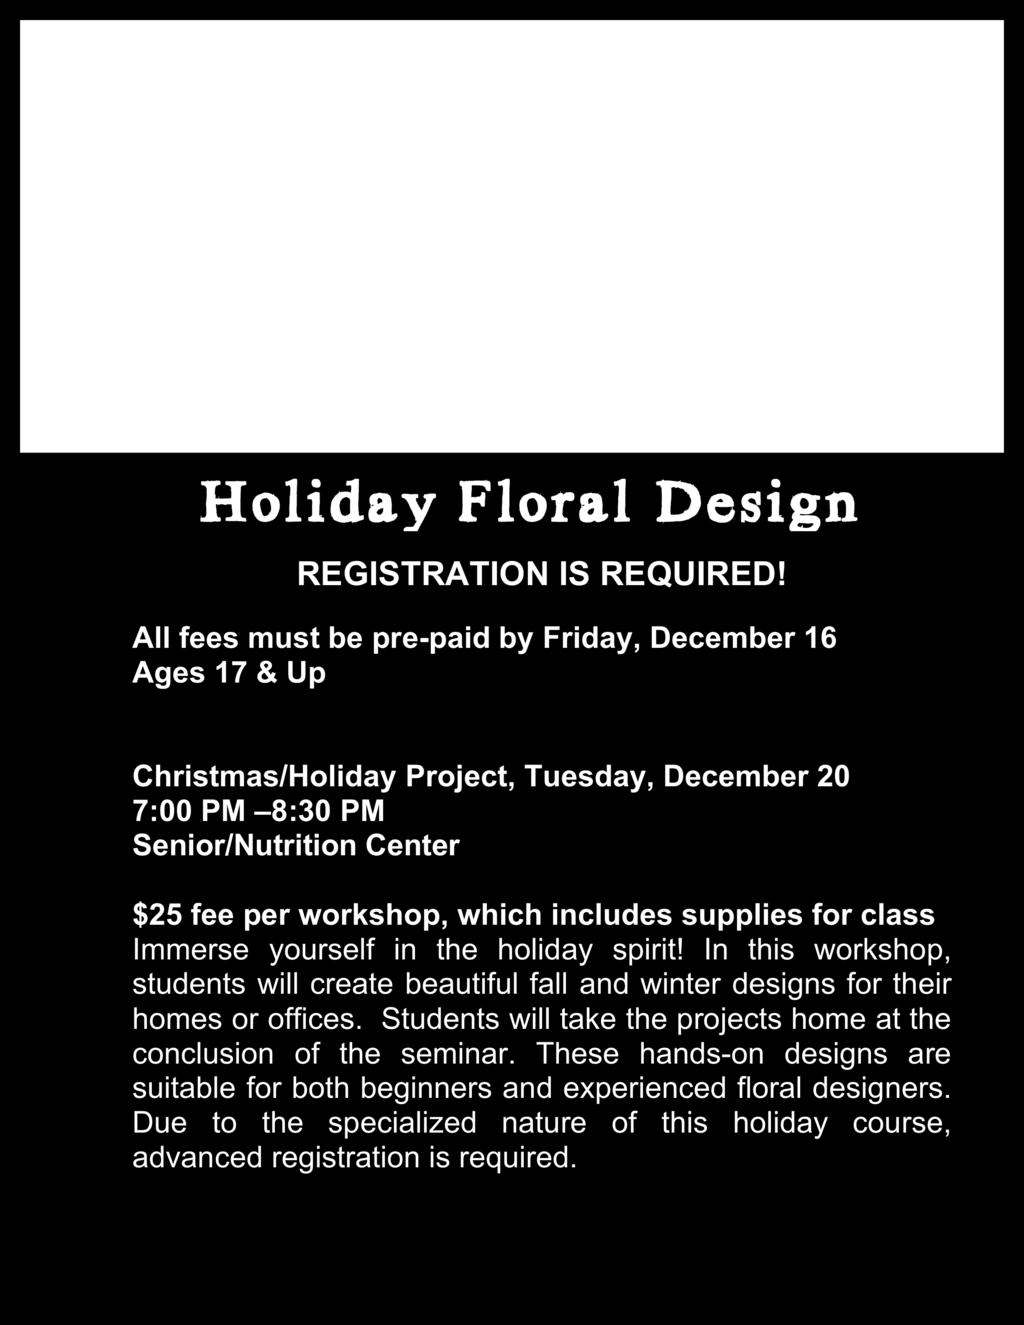 All fees must be pre-paid Ages 17 & Up Christmas/Holiday Project, Tuesday, December 19 7:00 PM 8:30 PM at Senior/Nutrition Center 201 Highwood Avenue $25 fee per workshop, which includes supplies for